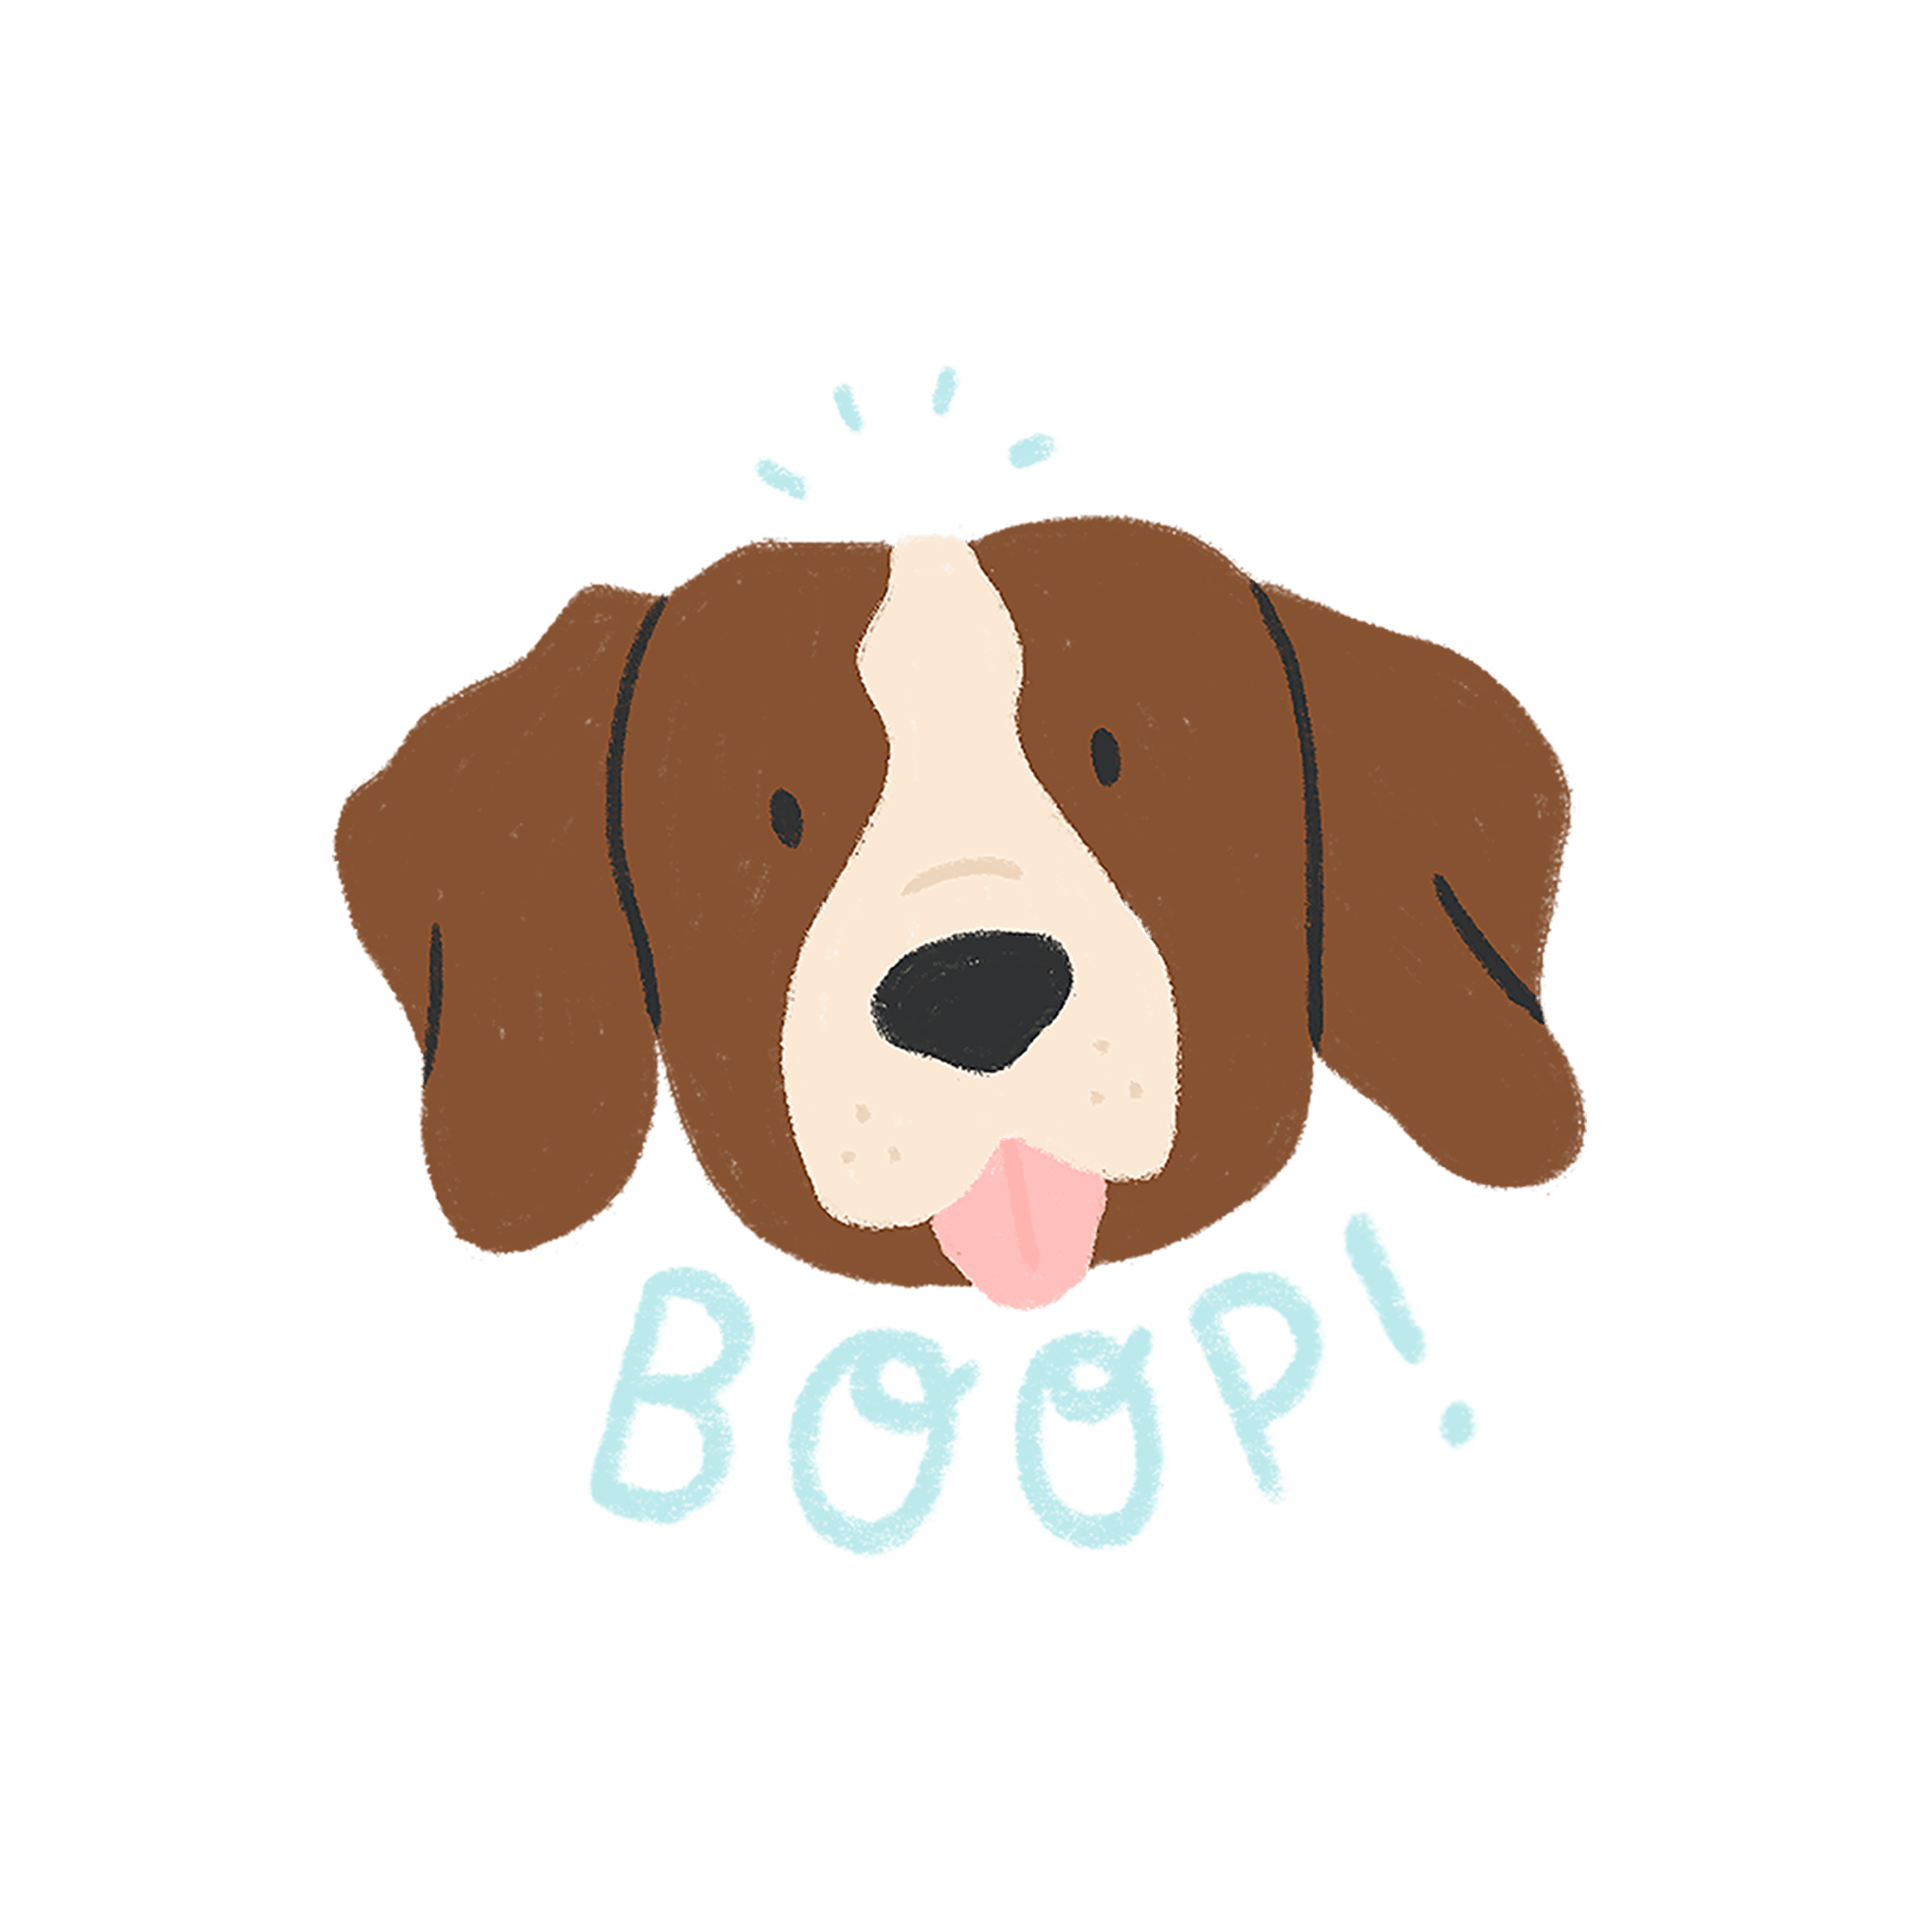 An illustration of a brown and white dog head with the word 